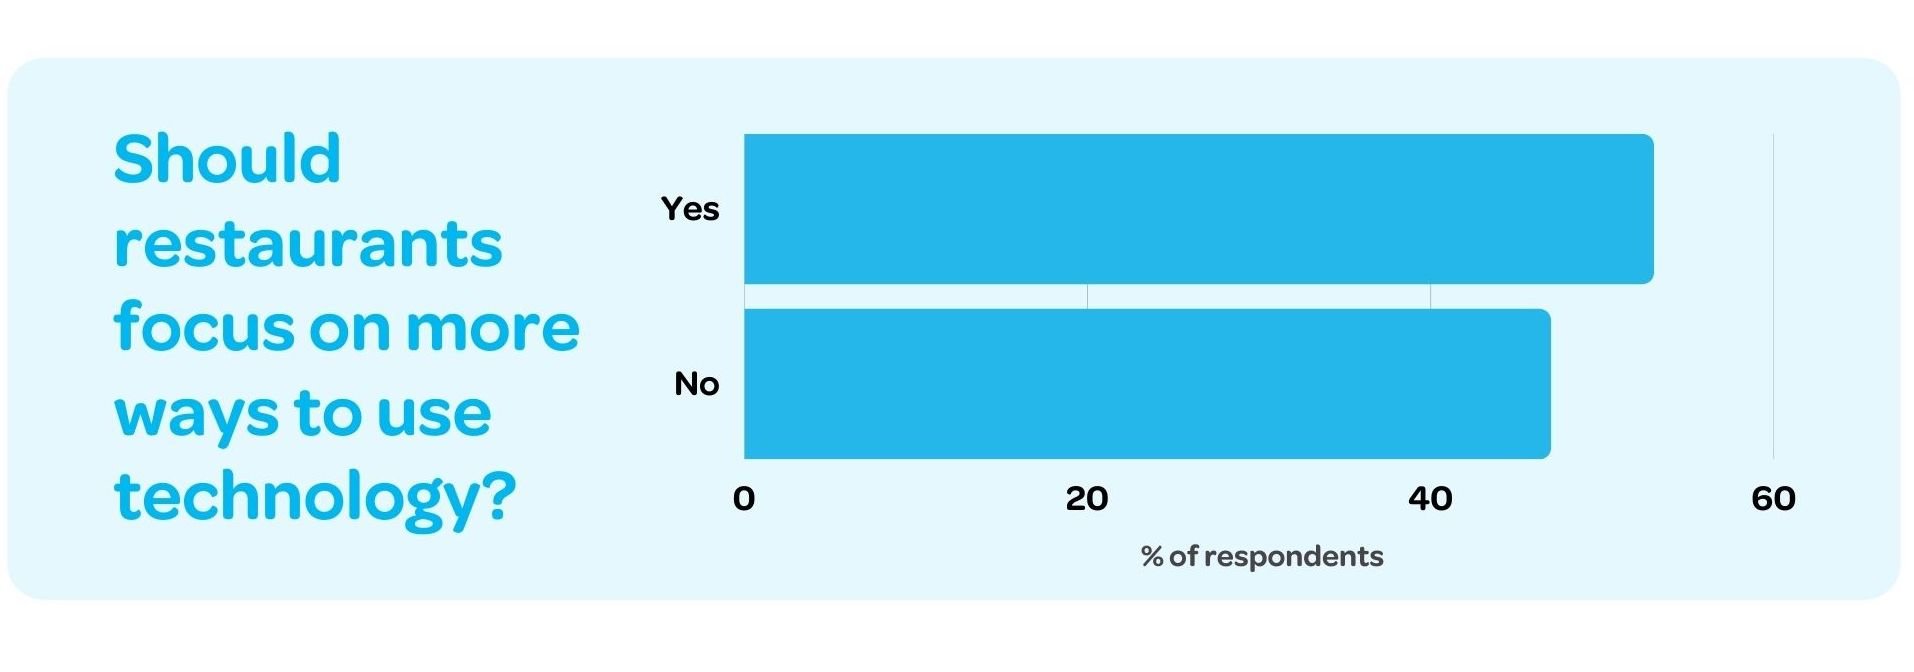 Graph showing diner opinions on whether venues should focus more on technology